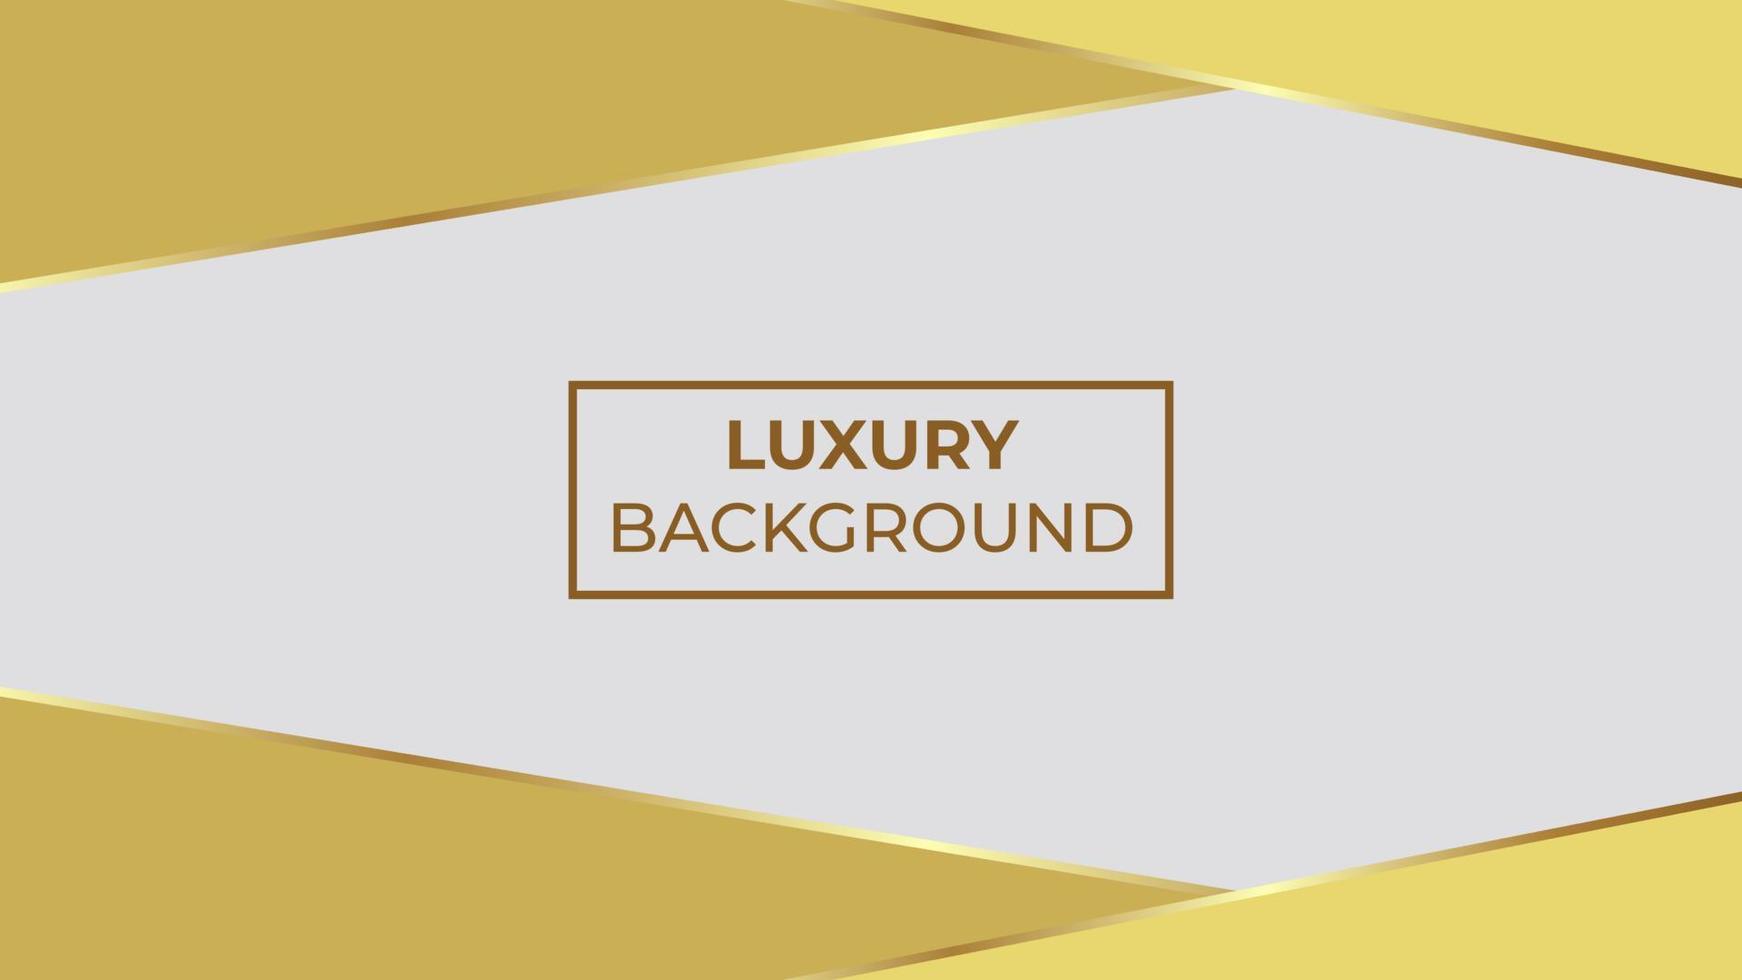 Luxury Background with overlapping shapes, easy to edit vector